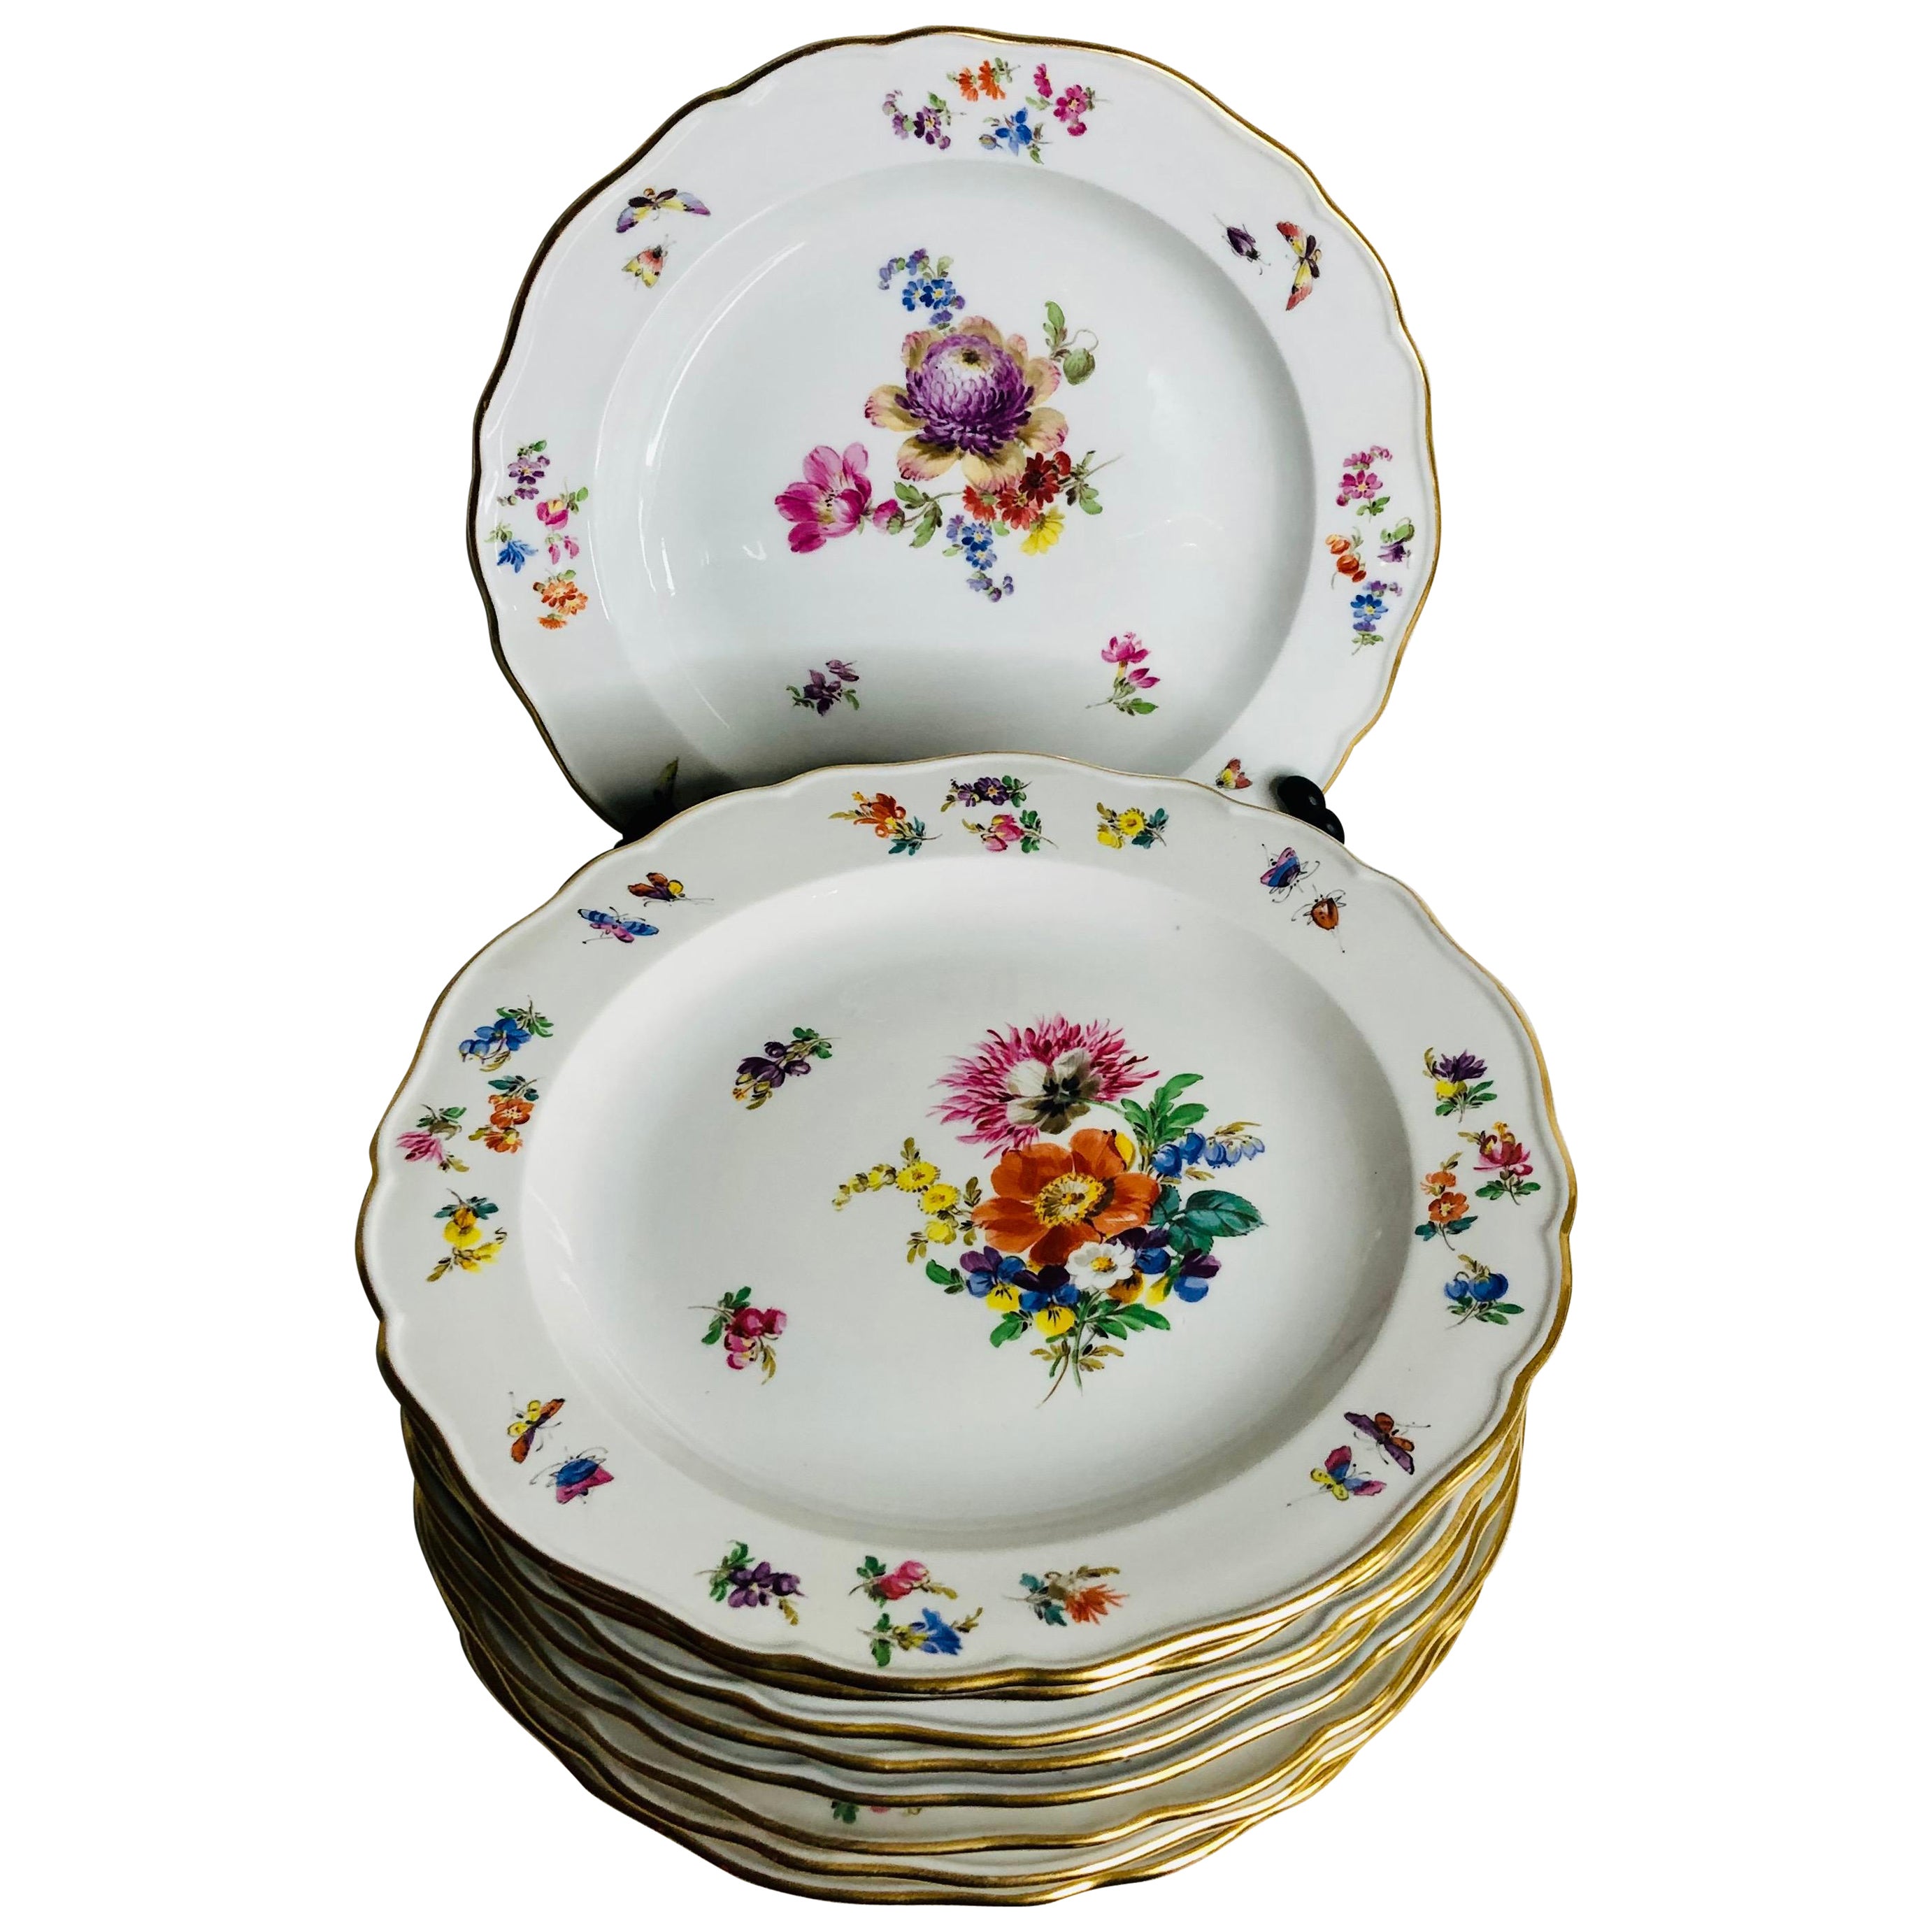 Set of 12 Meissen Luncheon Plates Each Painted with a Different Flower Bouquet